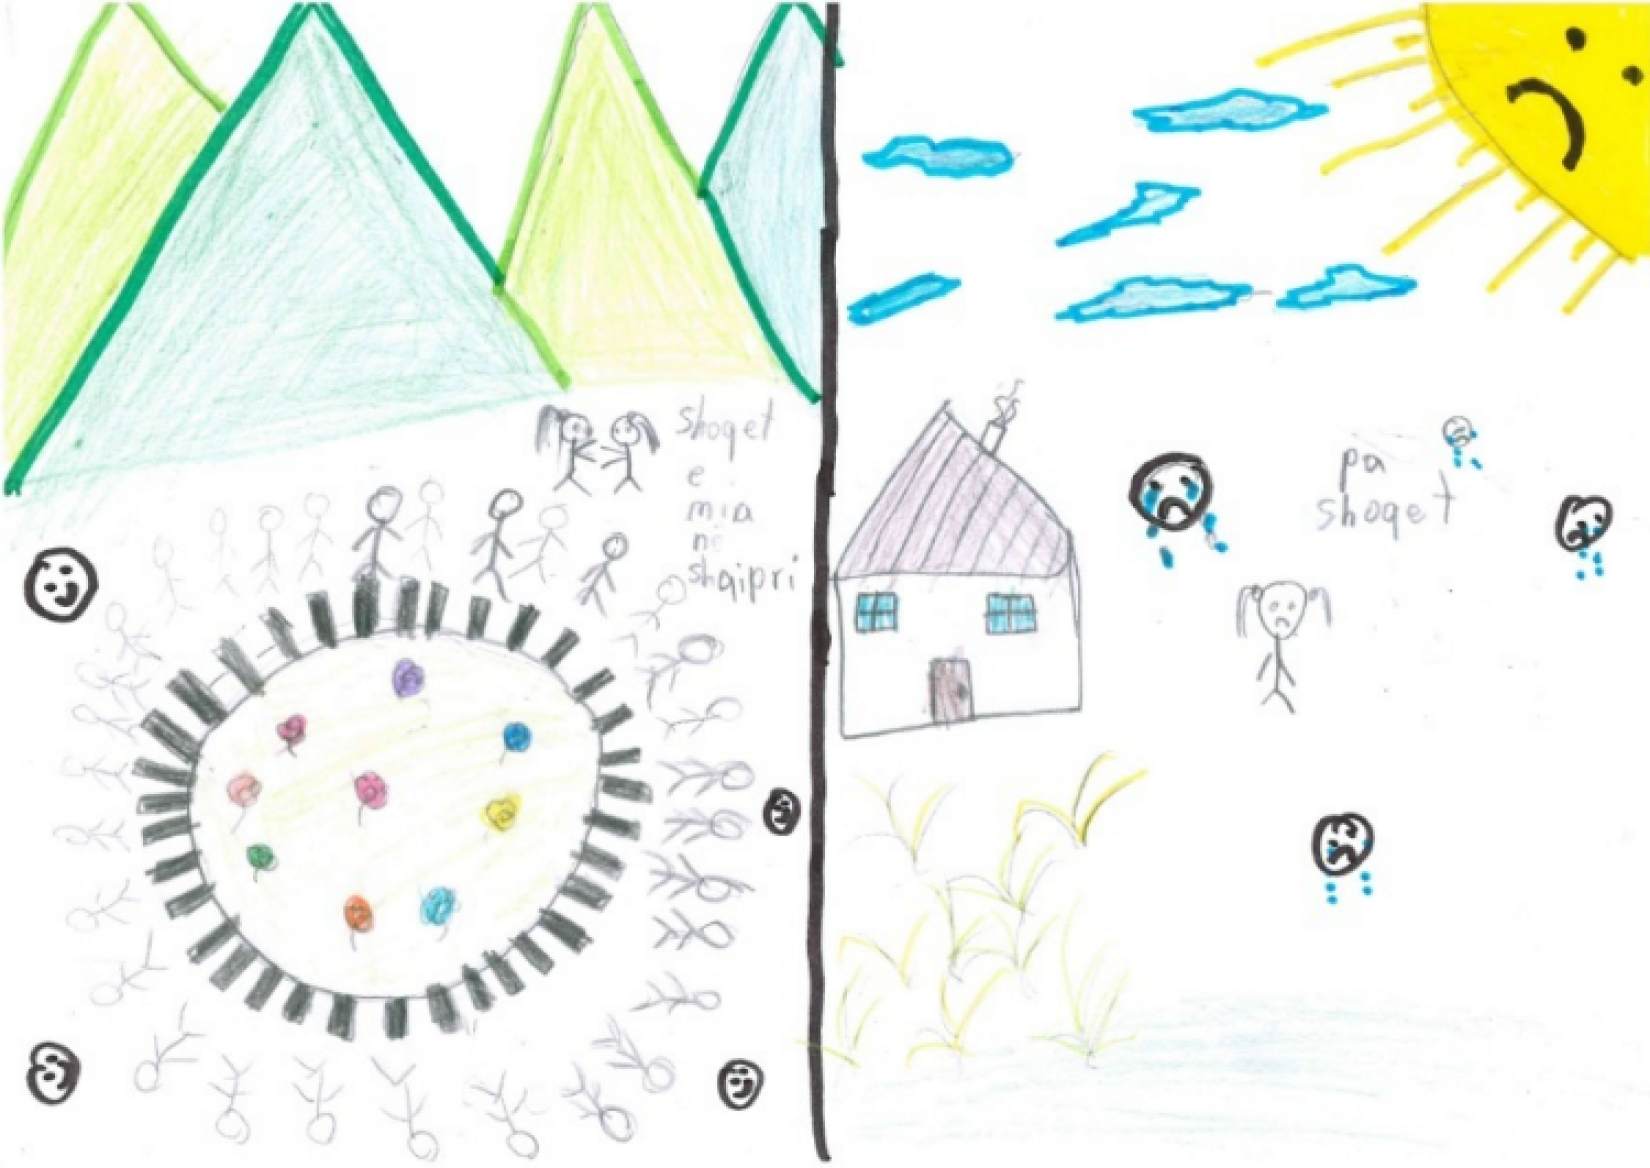 A drawing by a young refugee living in Albania.